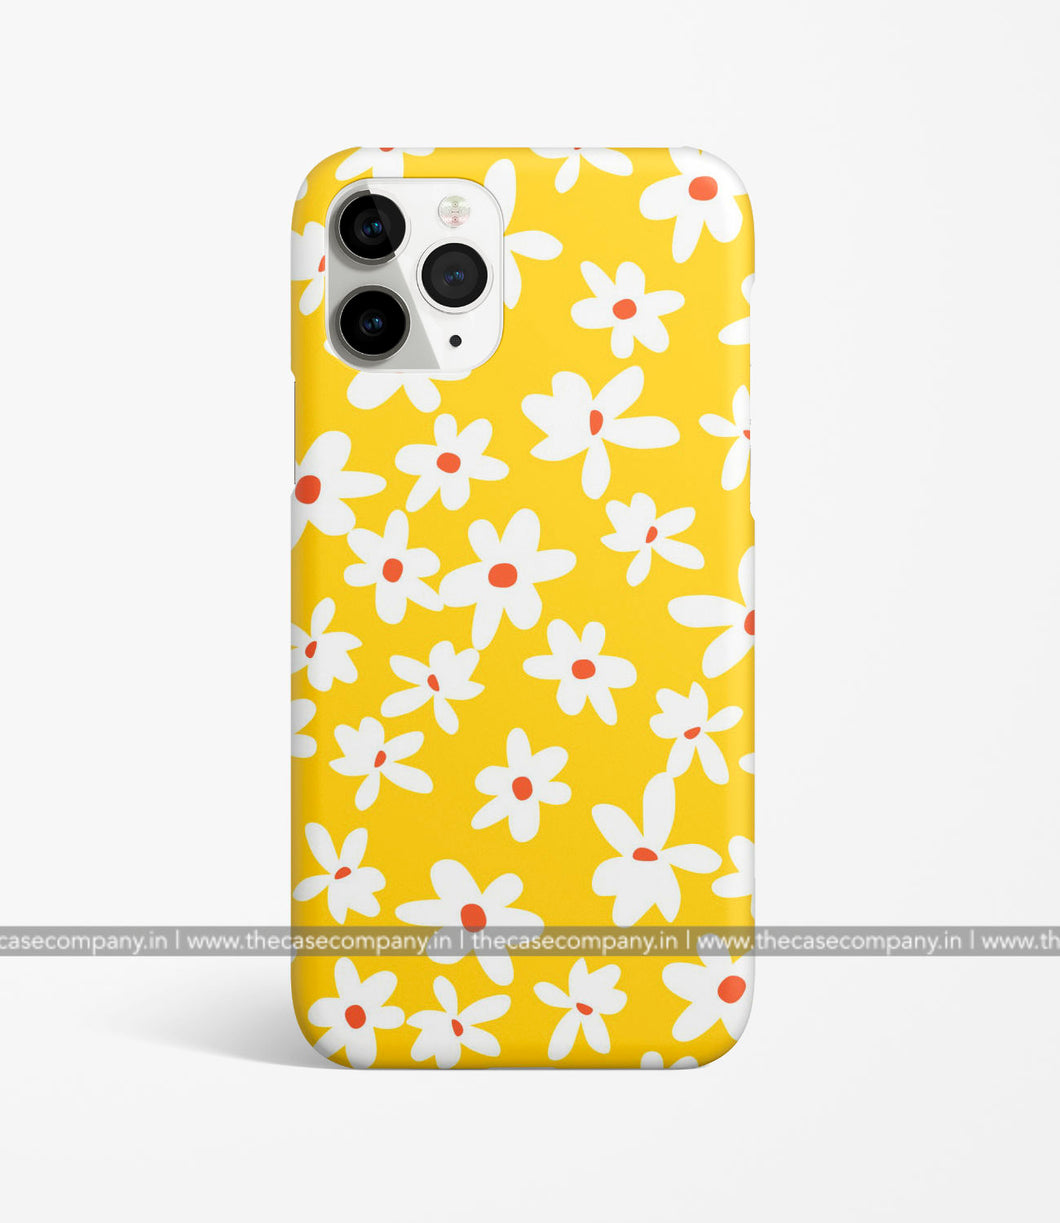 Lazy Daisies Floral Phone Case